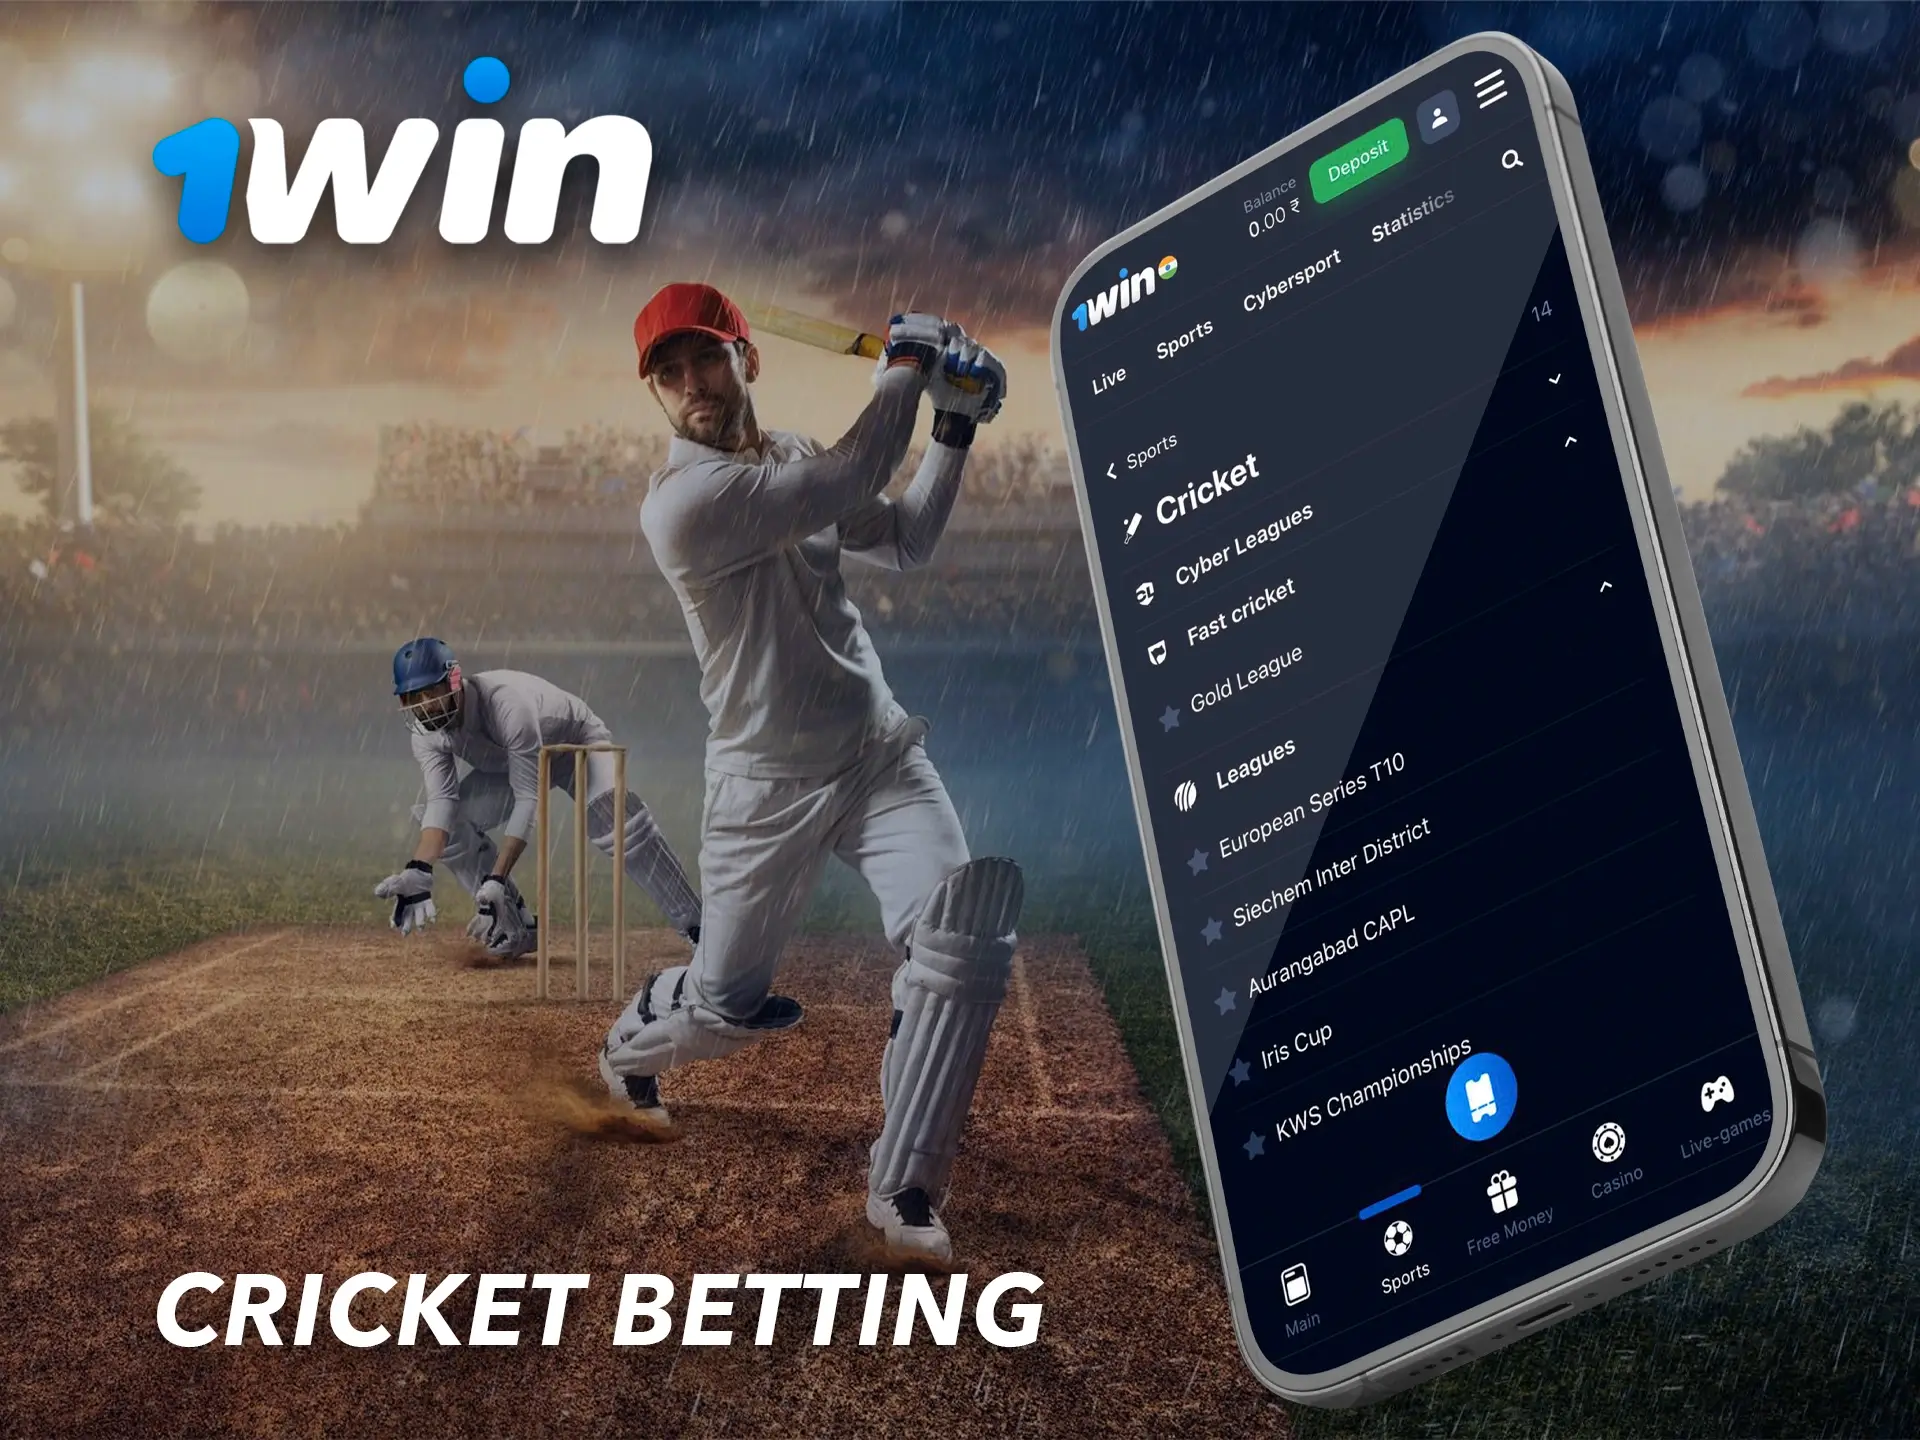 All major tournaments and major cricket events are available at 1Win for your predictions.